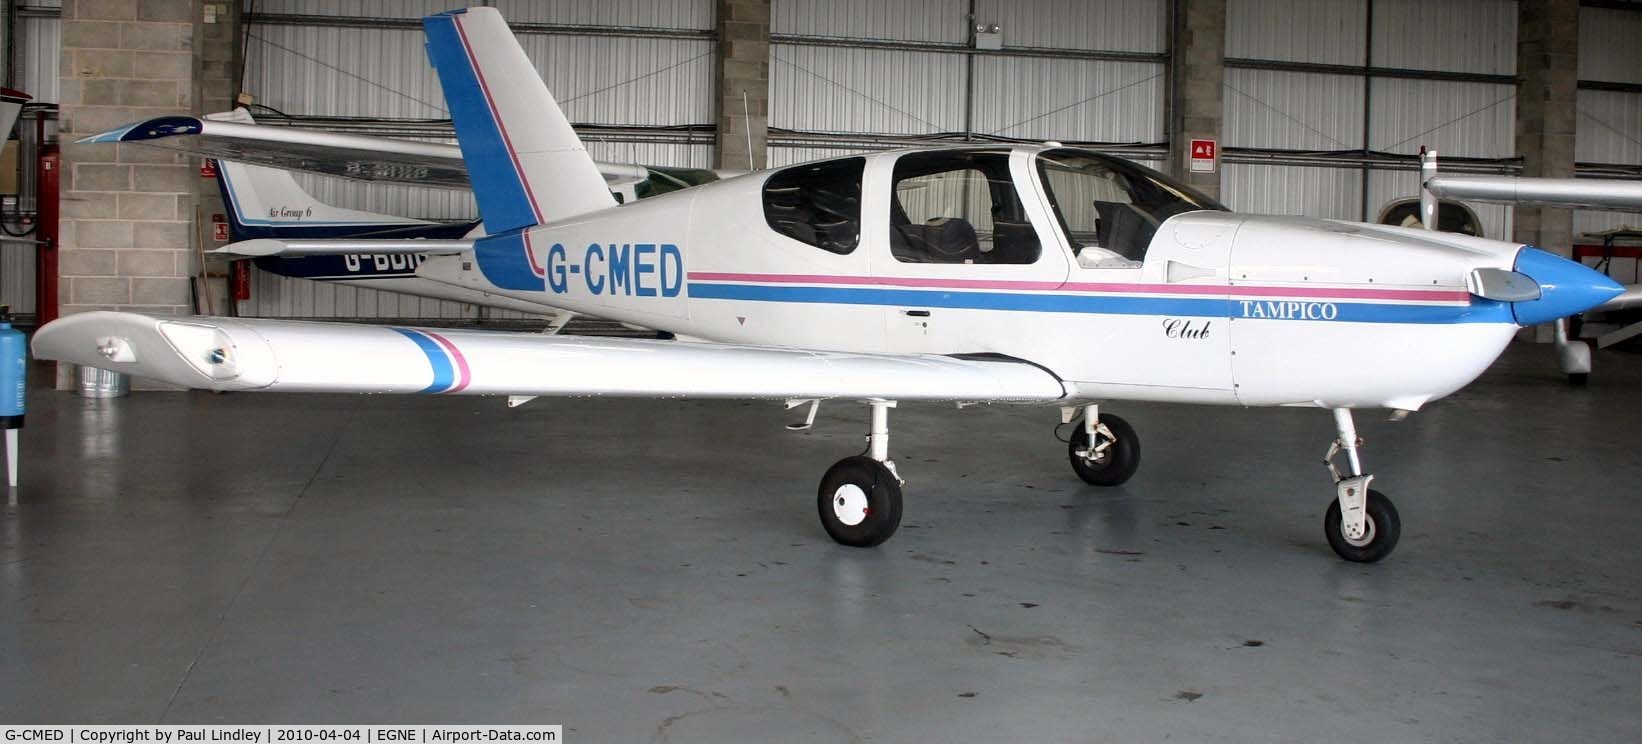 G-CMED, 2000 Socata TB-9 Tampico C/N 1867, under cover